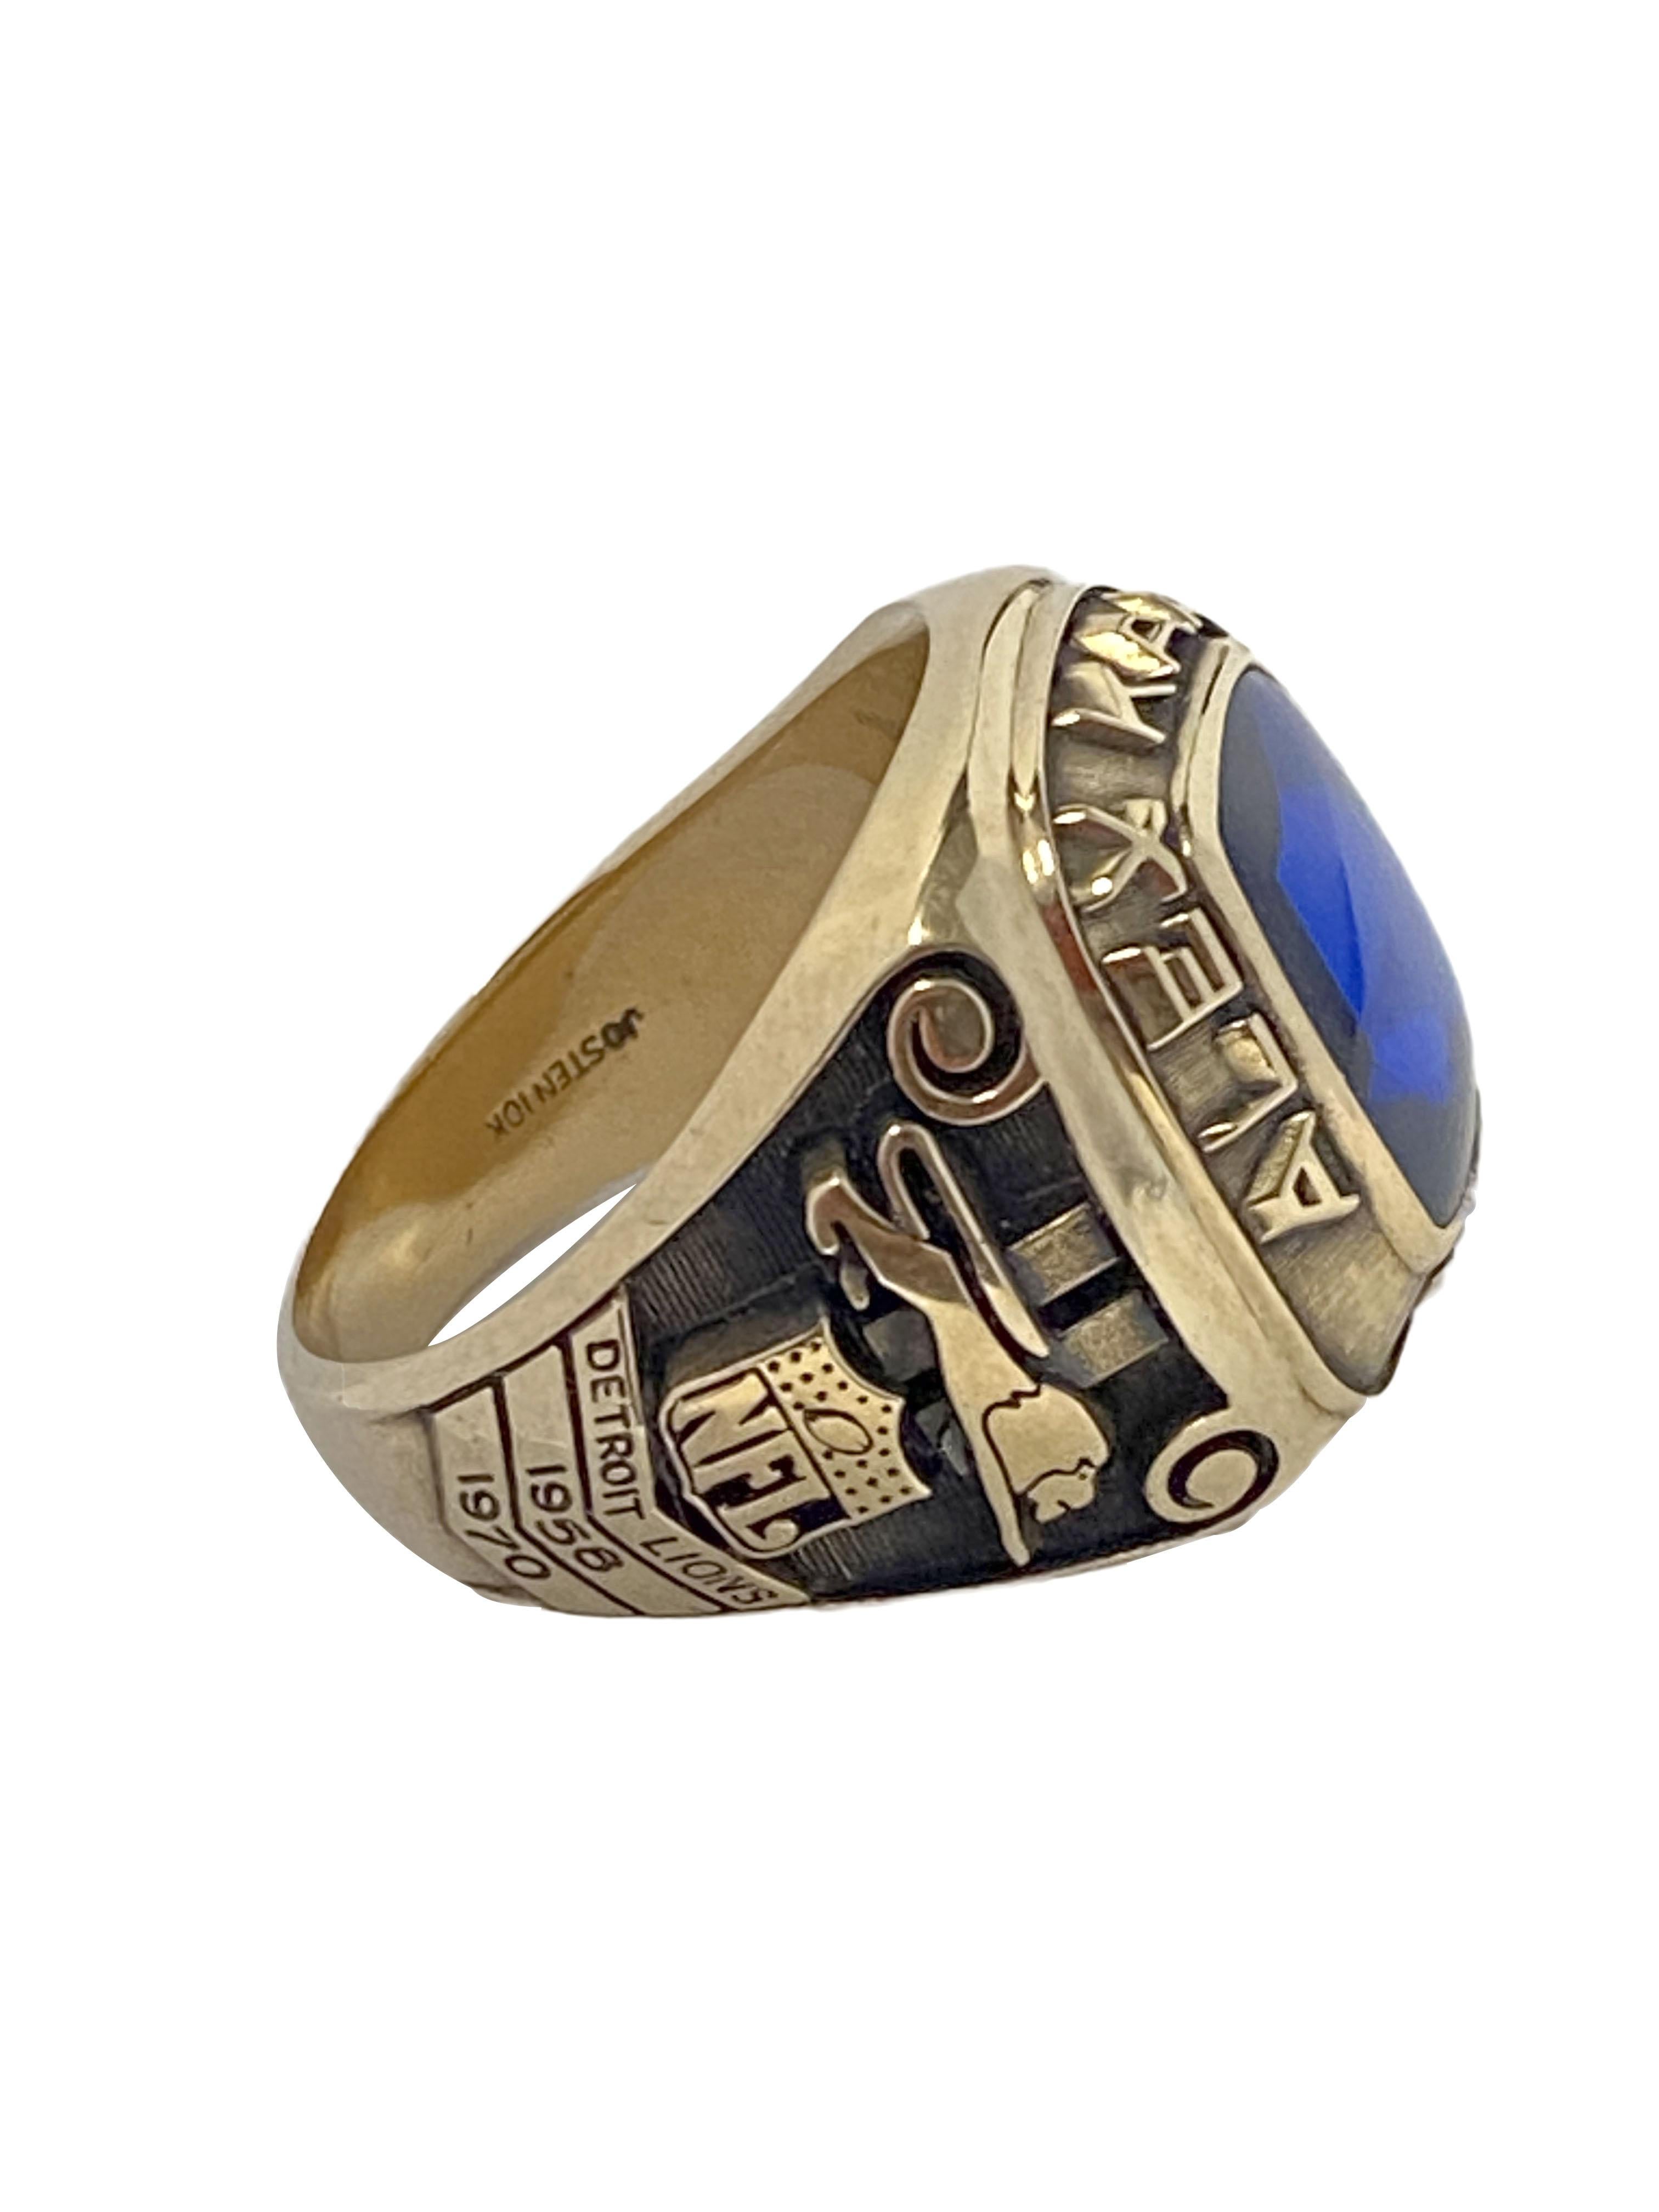 Alex Karras Detriot Lions 1971 Championship NFL Football Ring In Excellent Condition In Chicago, IL